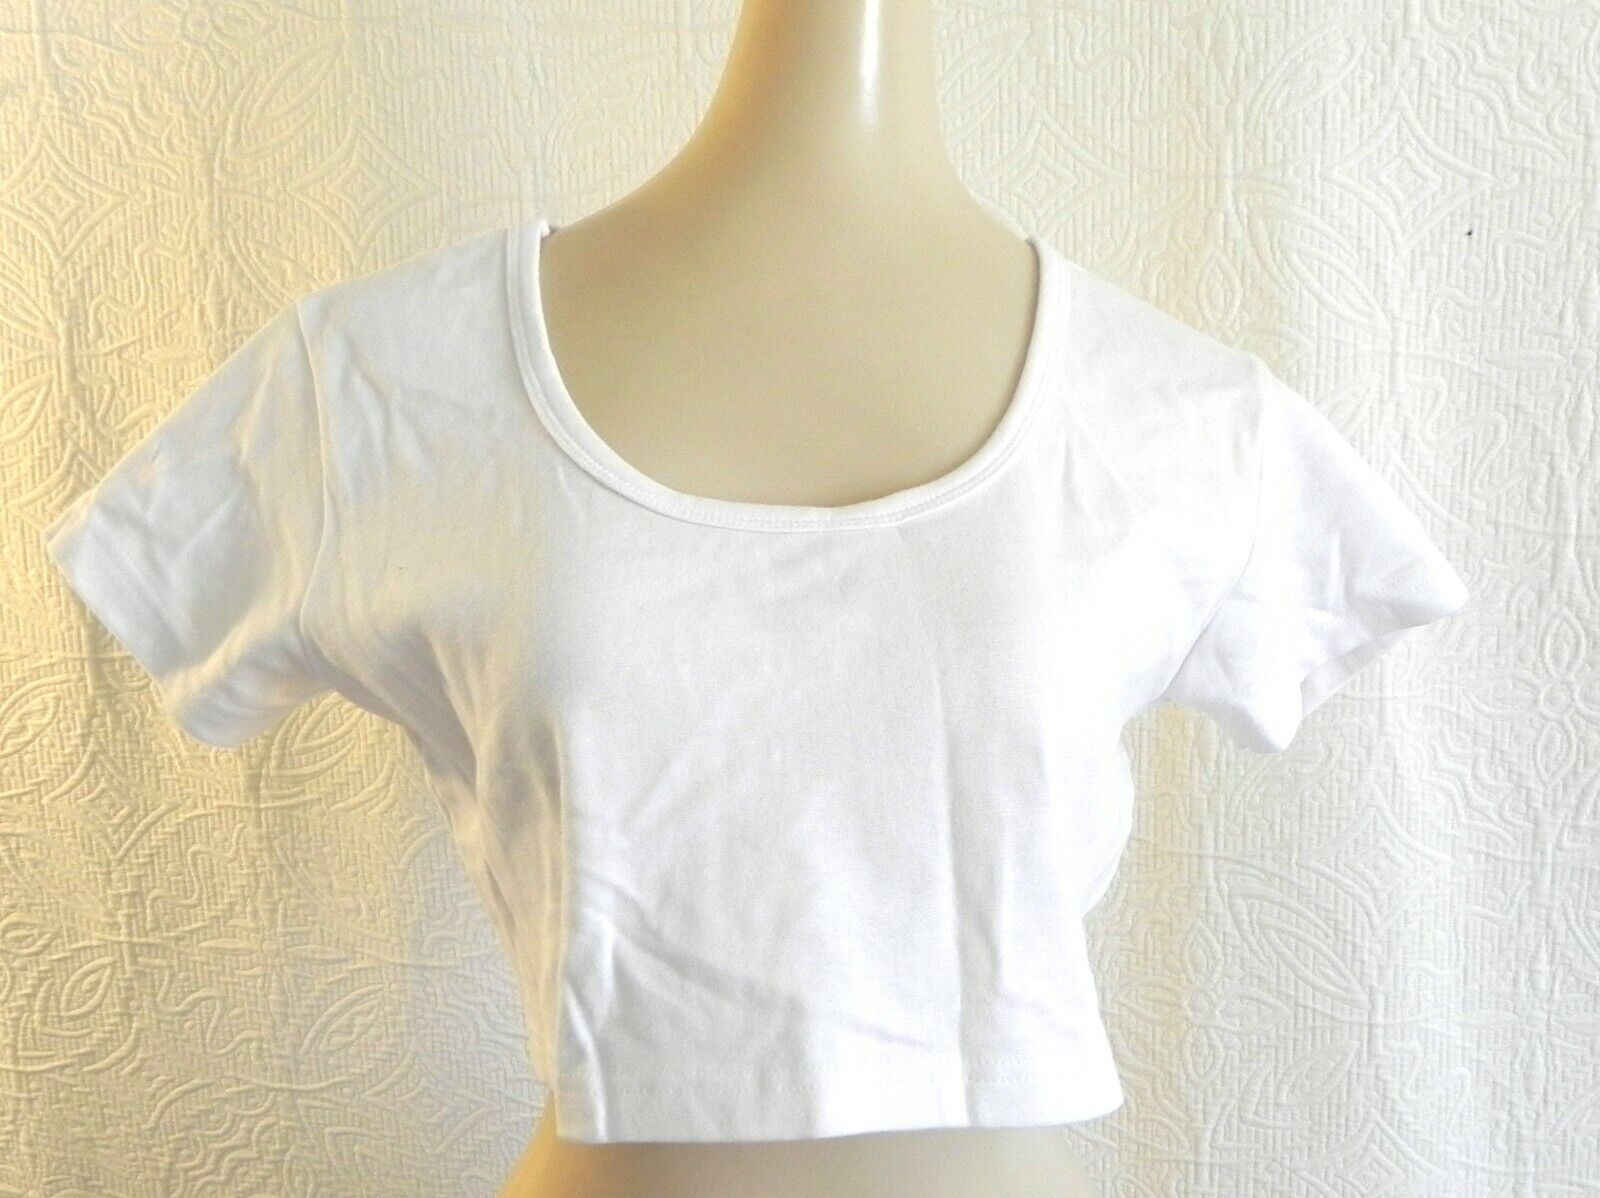 Stretch One Step Up Crop T-Shirt White Cotton Blend Scoop Neck Short Sleeve  L